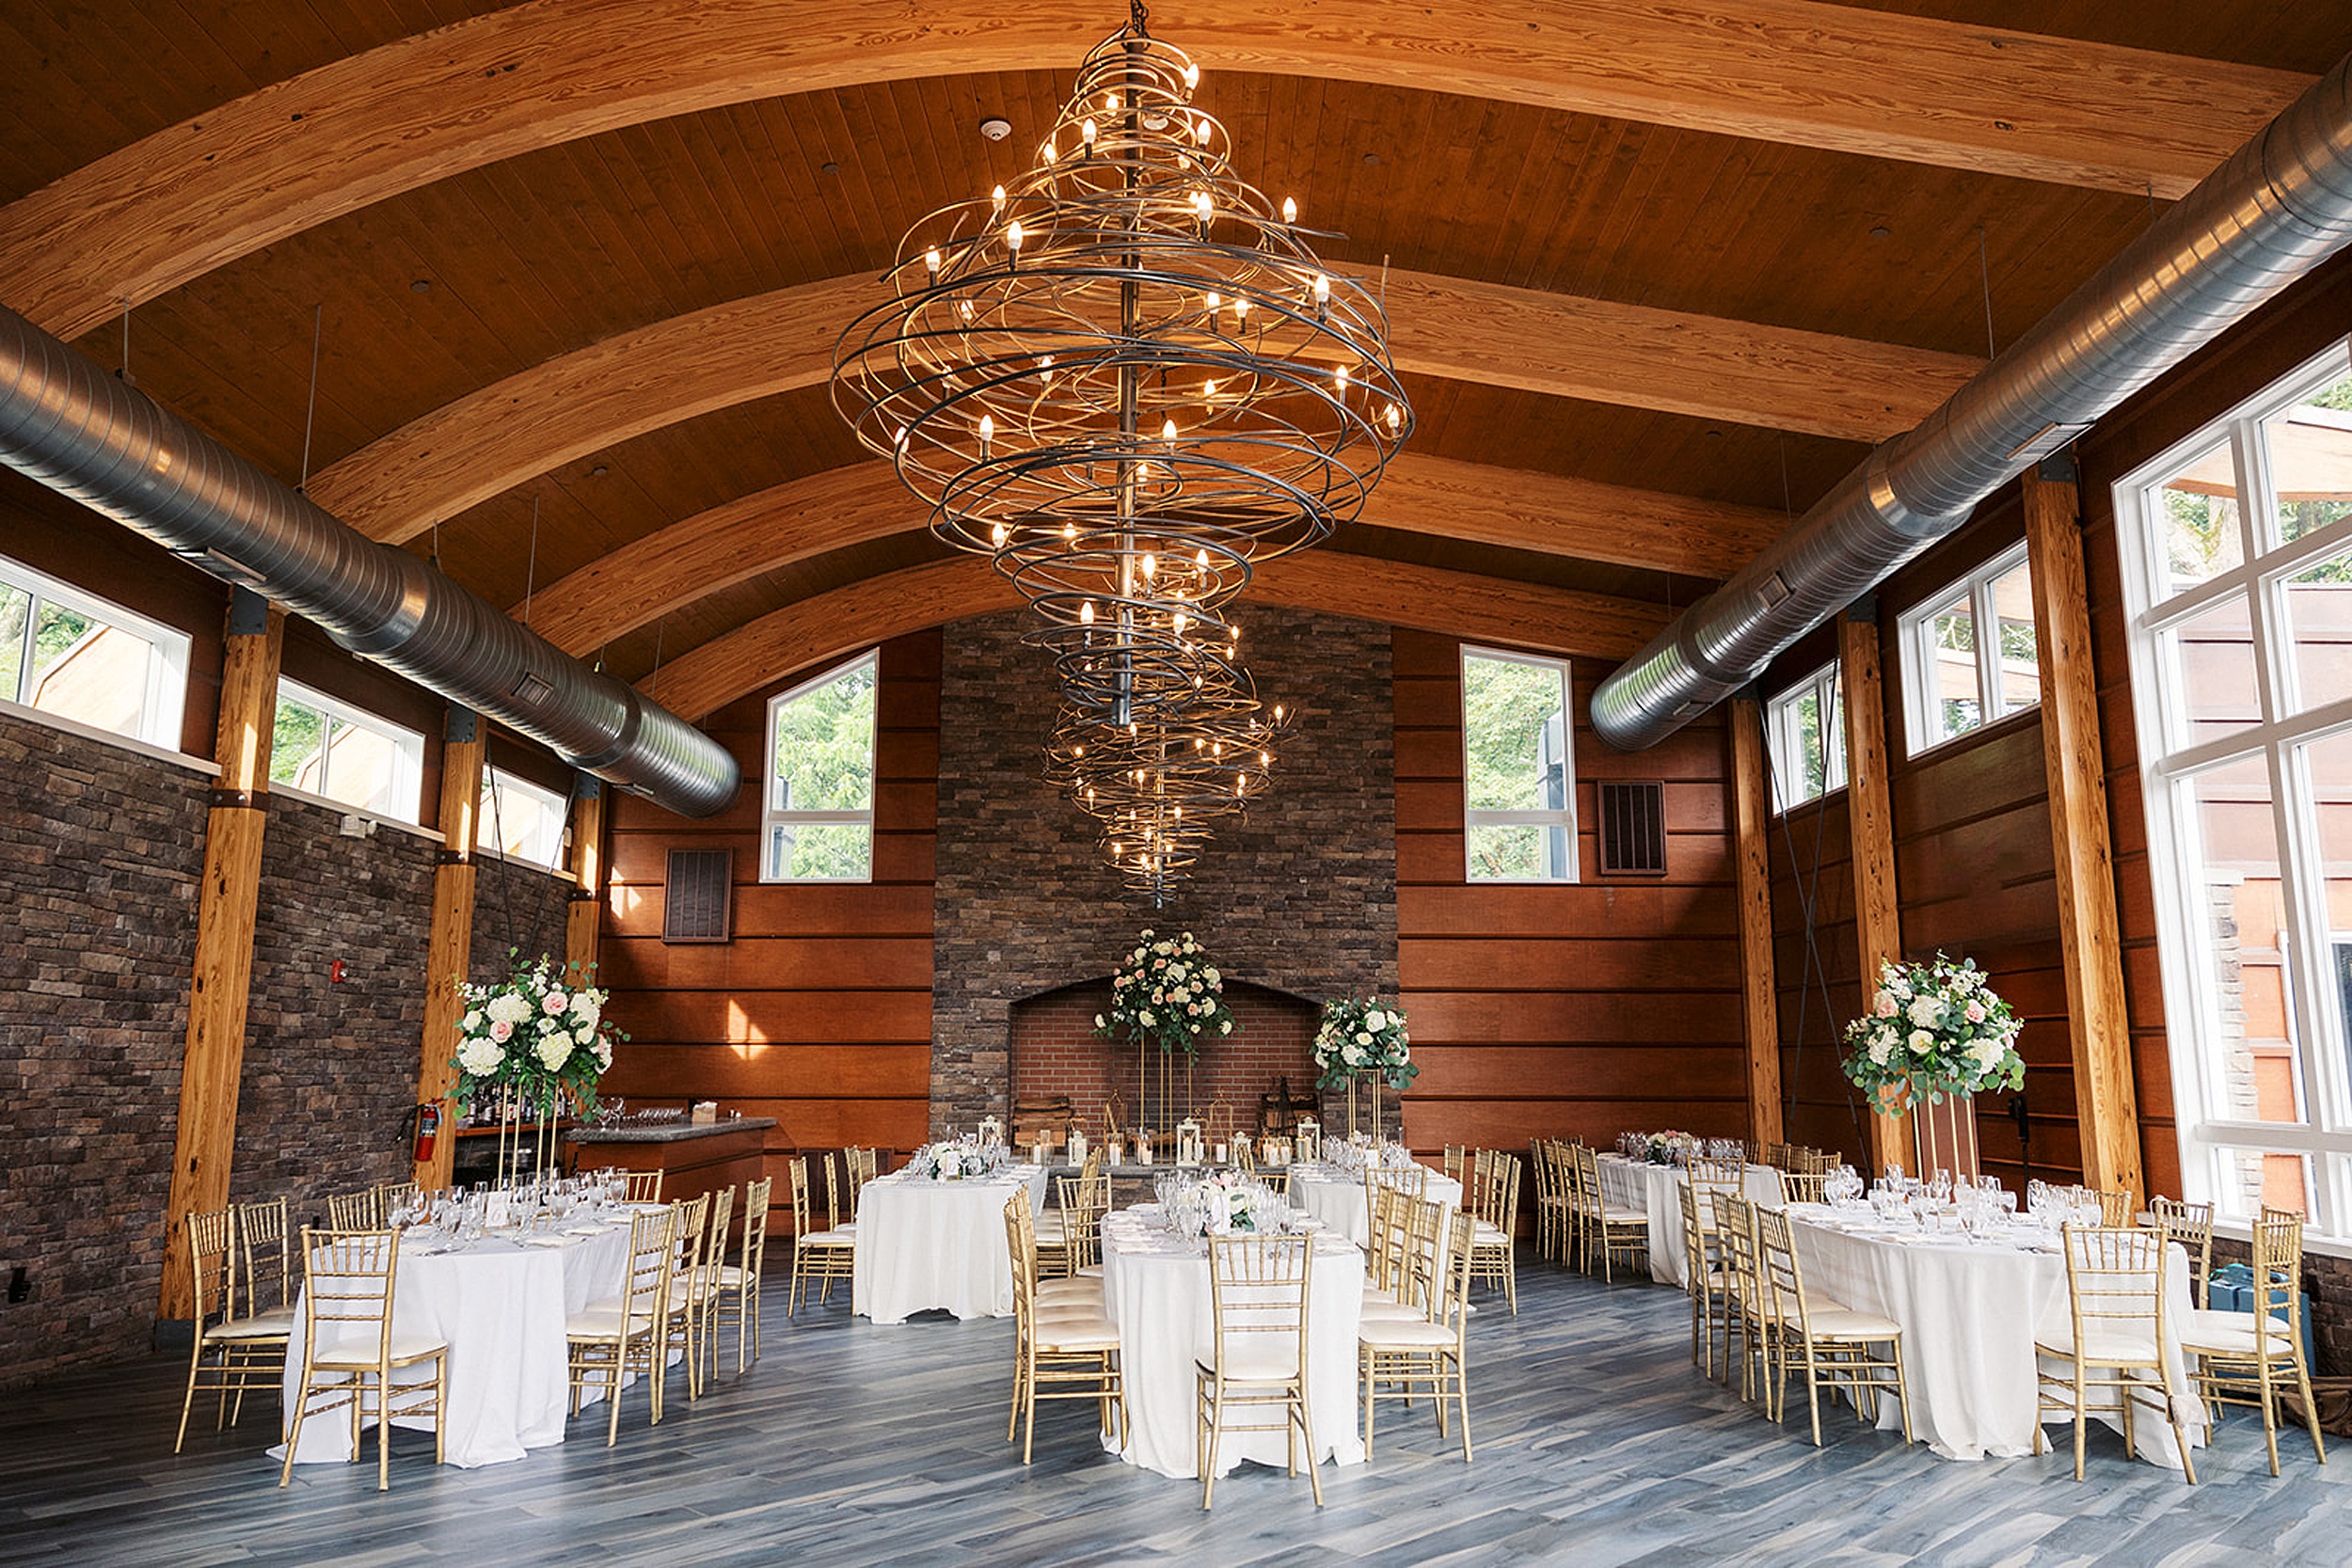 Details of a wedding reception with white linen and golden chairs at the Stonehouse At Stirling Ridge Wedding venue